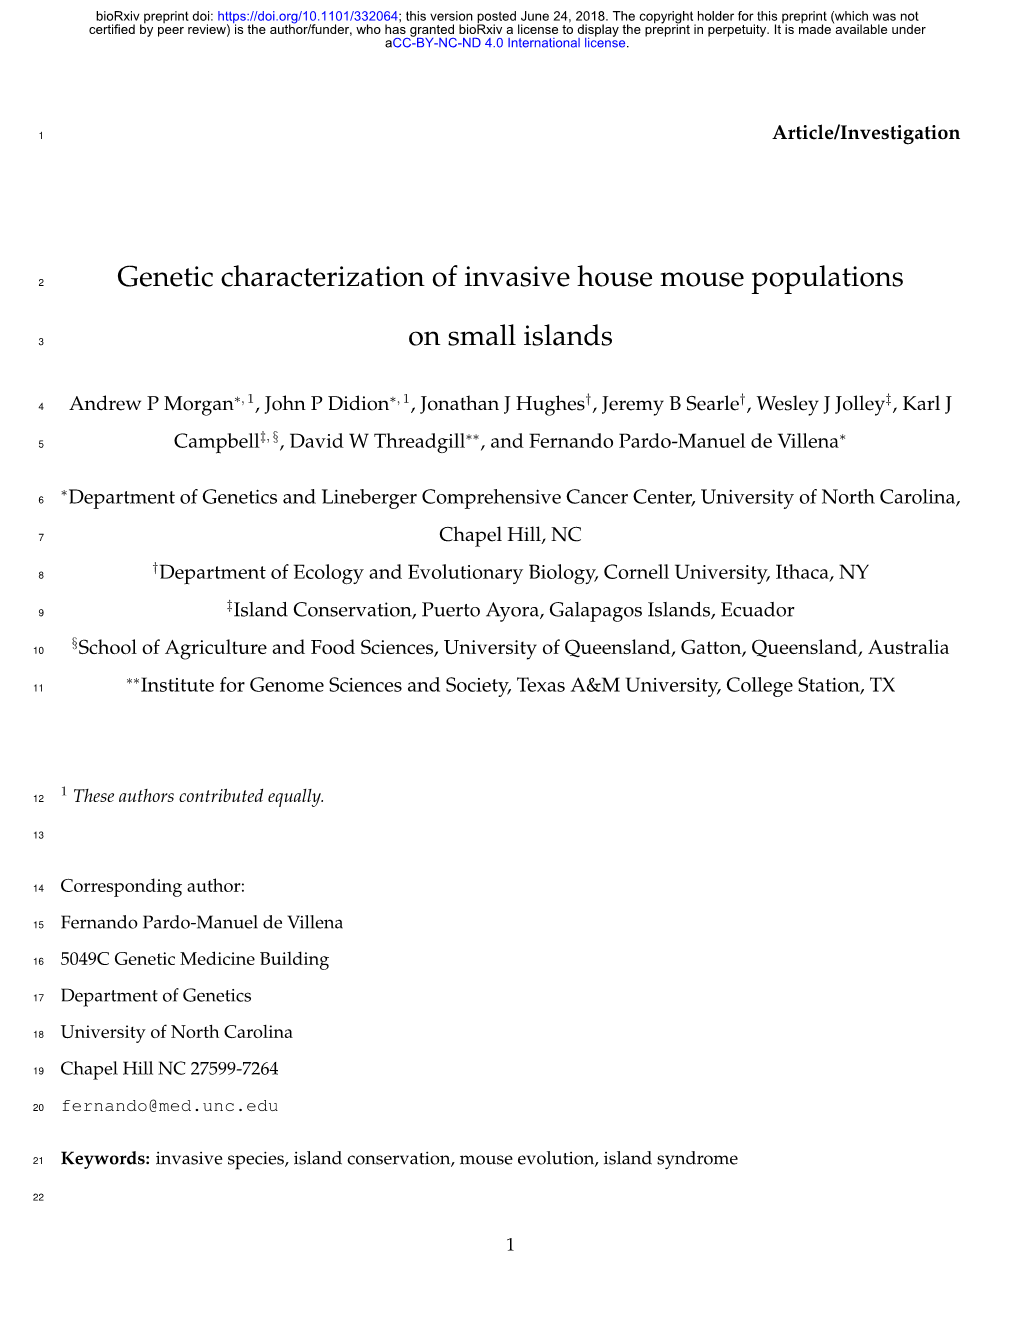 Genetic Characterization of Invasive House Mouse Populations on Small